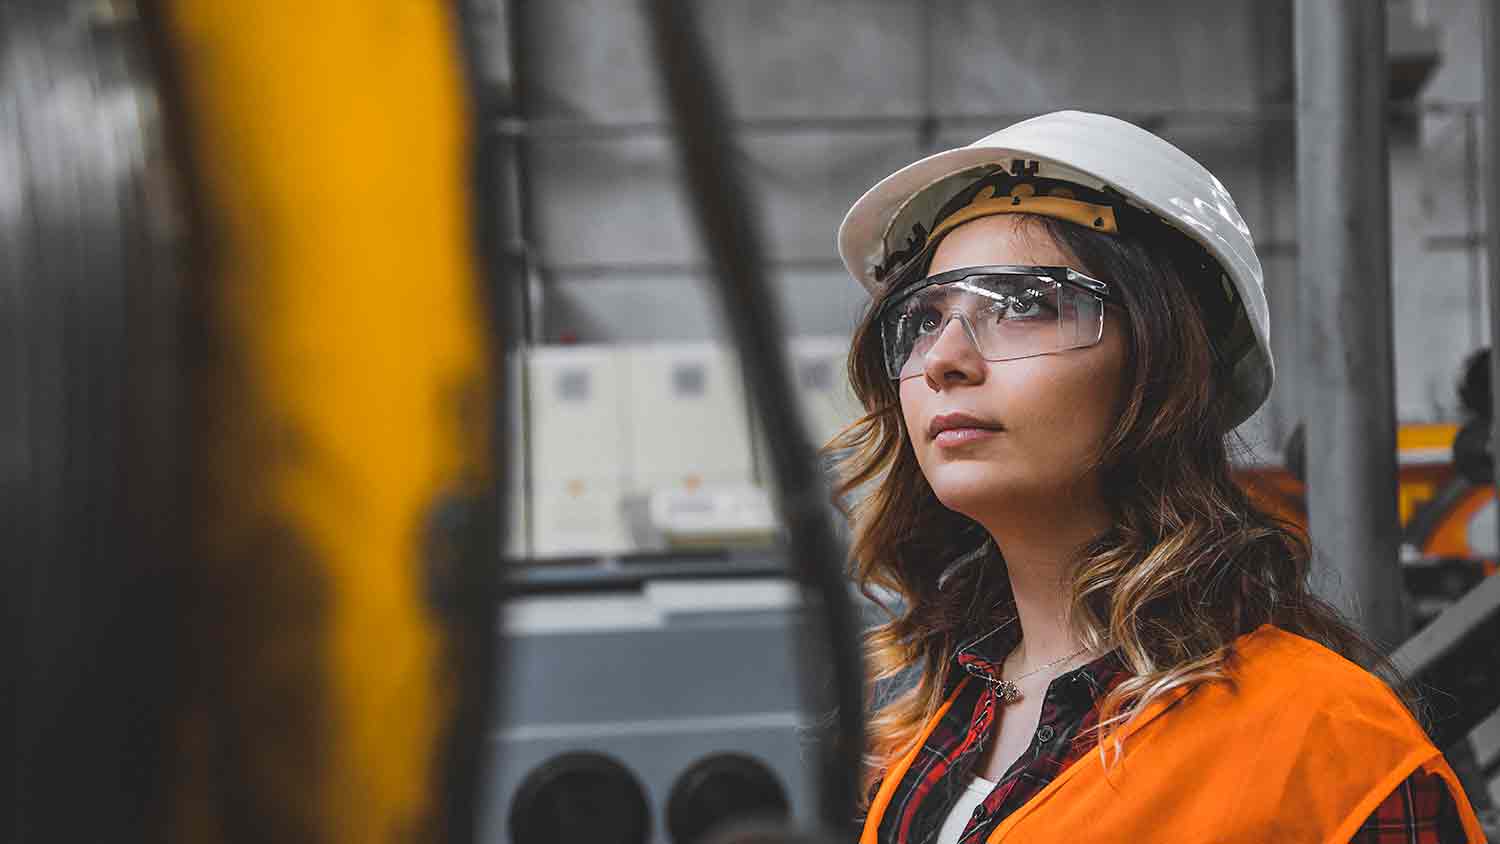 Younug woman worker with high vis, safety glasses and white hard hat listens or observes